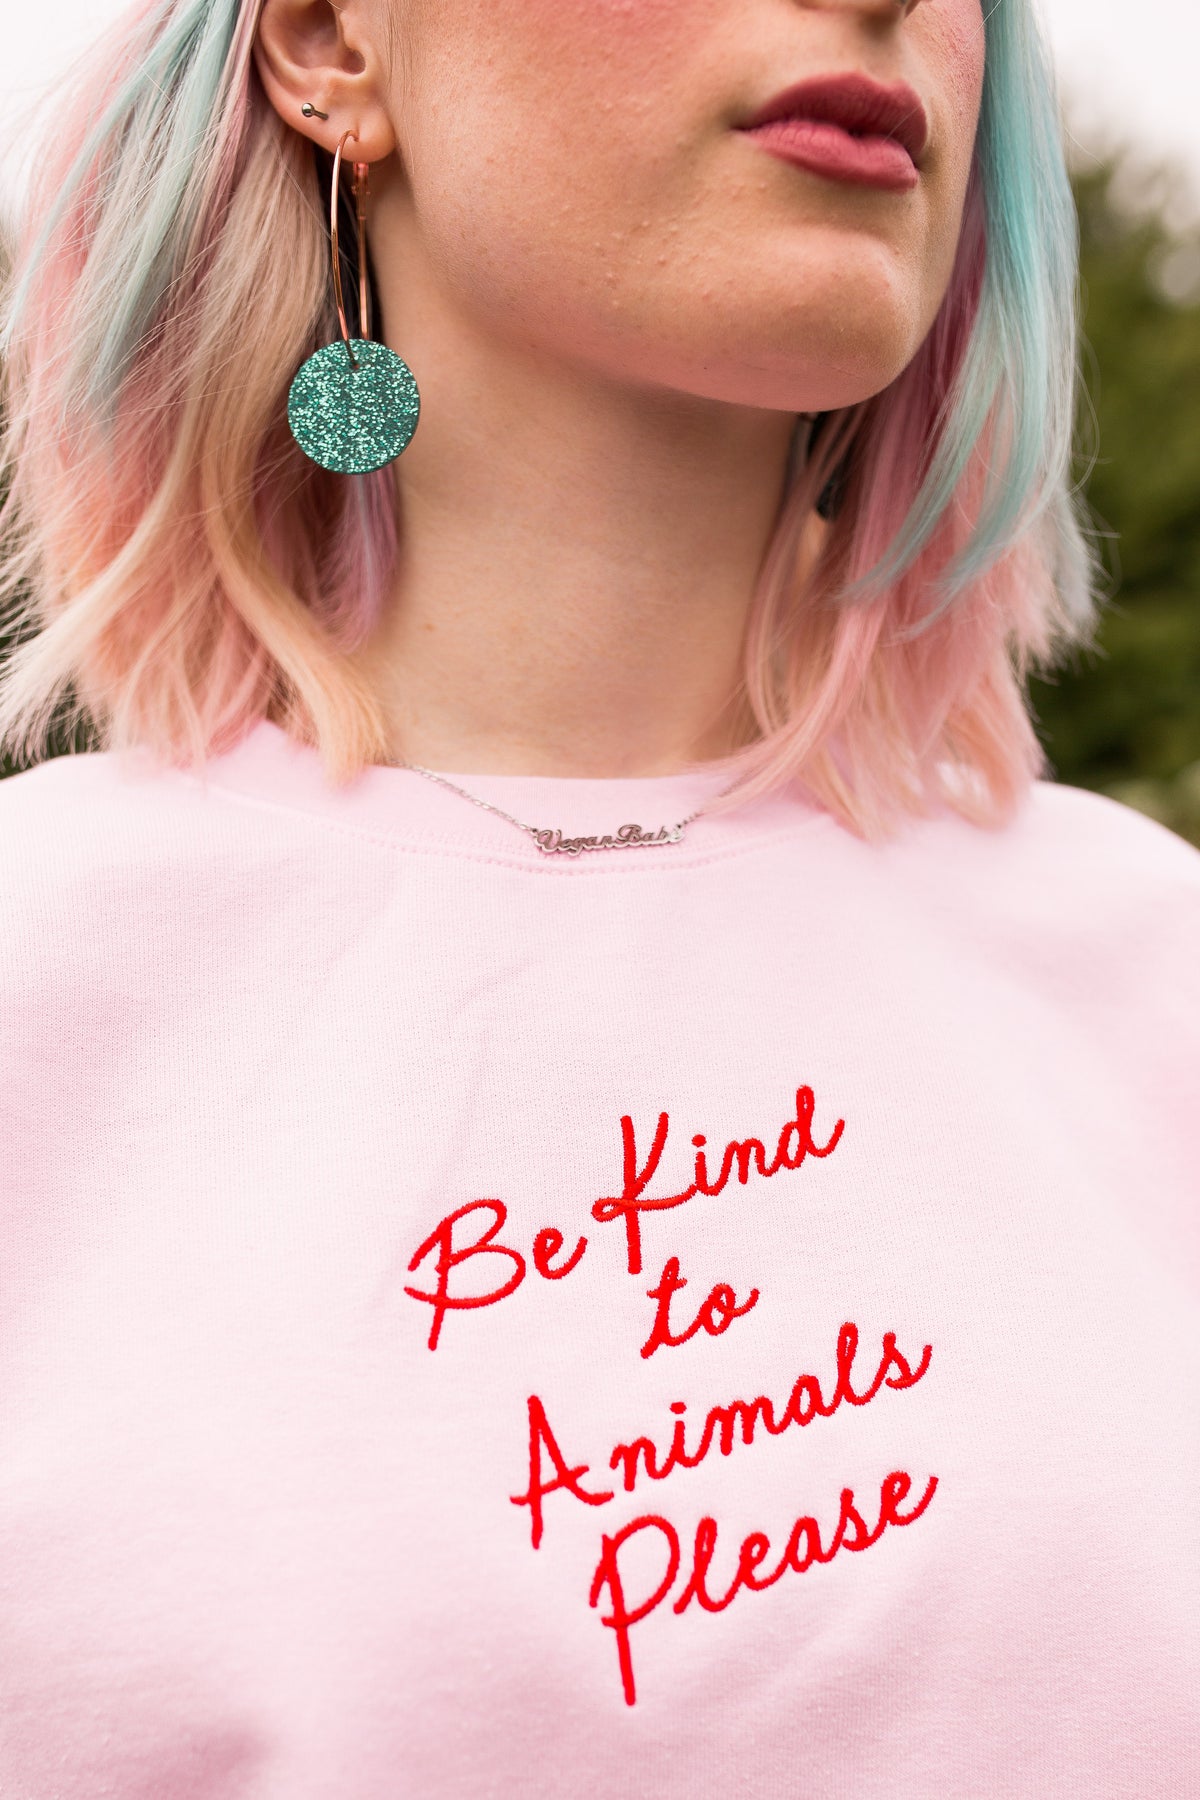 Be Kind to Animals Embroidered Sweatshirt